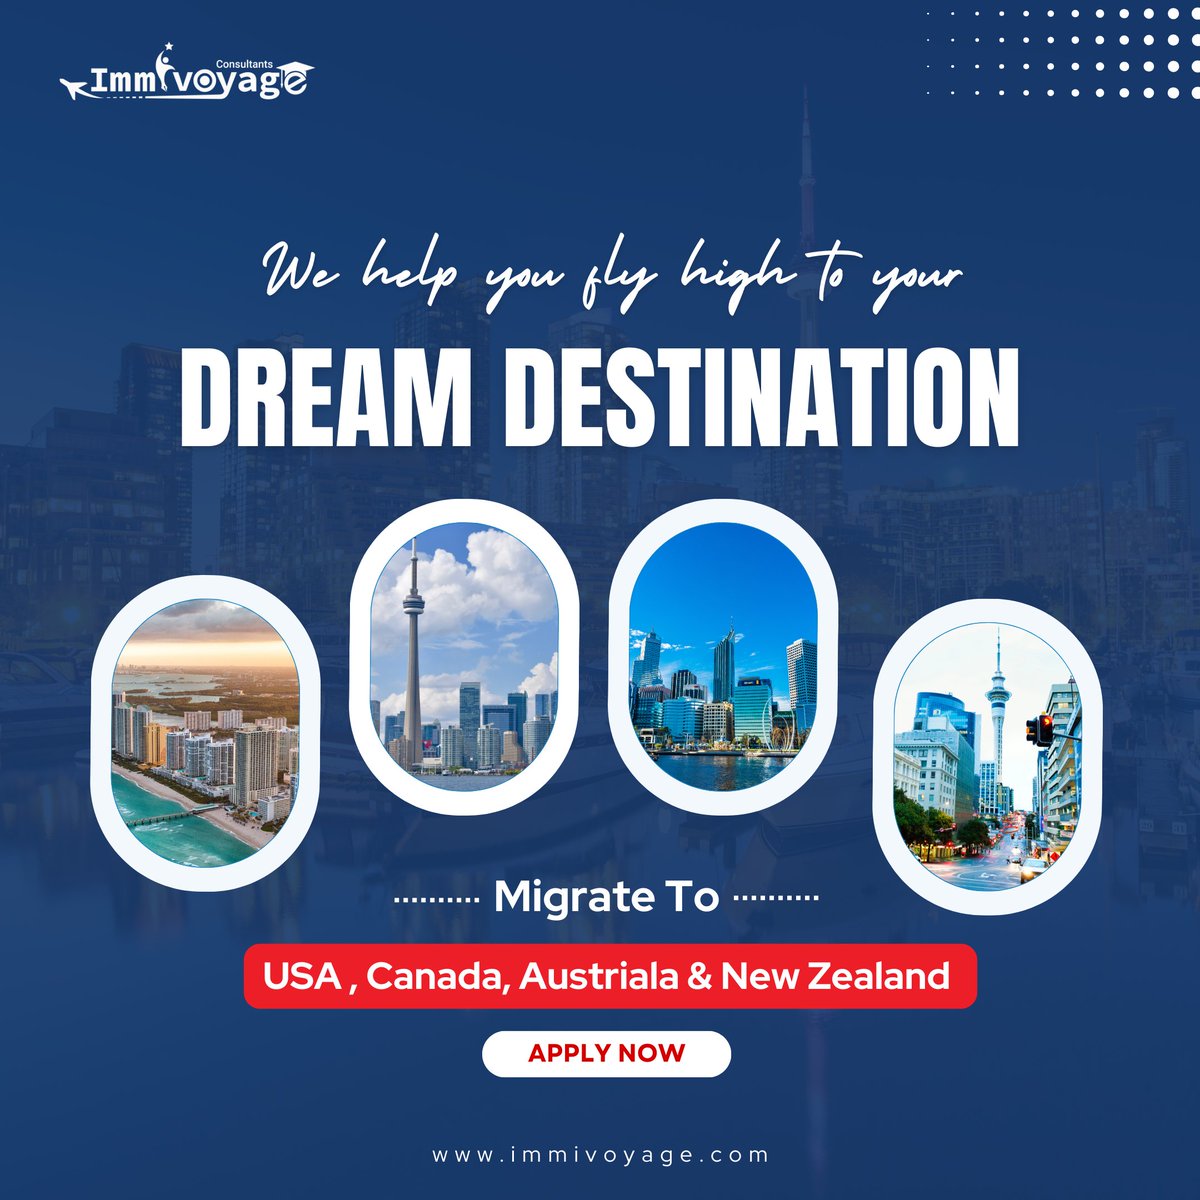 Embark on your journey to your dream destination! Explore opportunities in USA, Canada, Australia & New Zealand. Apply now and soar towards your aspirations! Learn More - immivoyage.com #AustraliaVisa #immivoyage #workpermit #studentdvisa